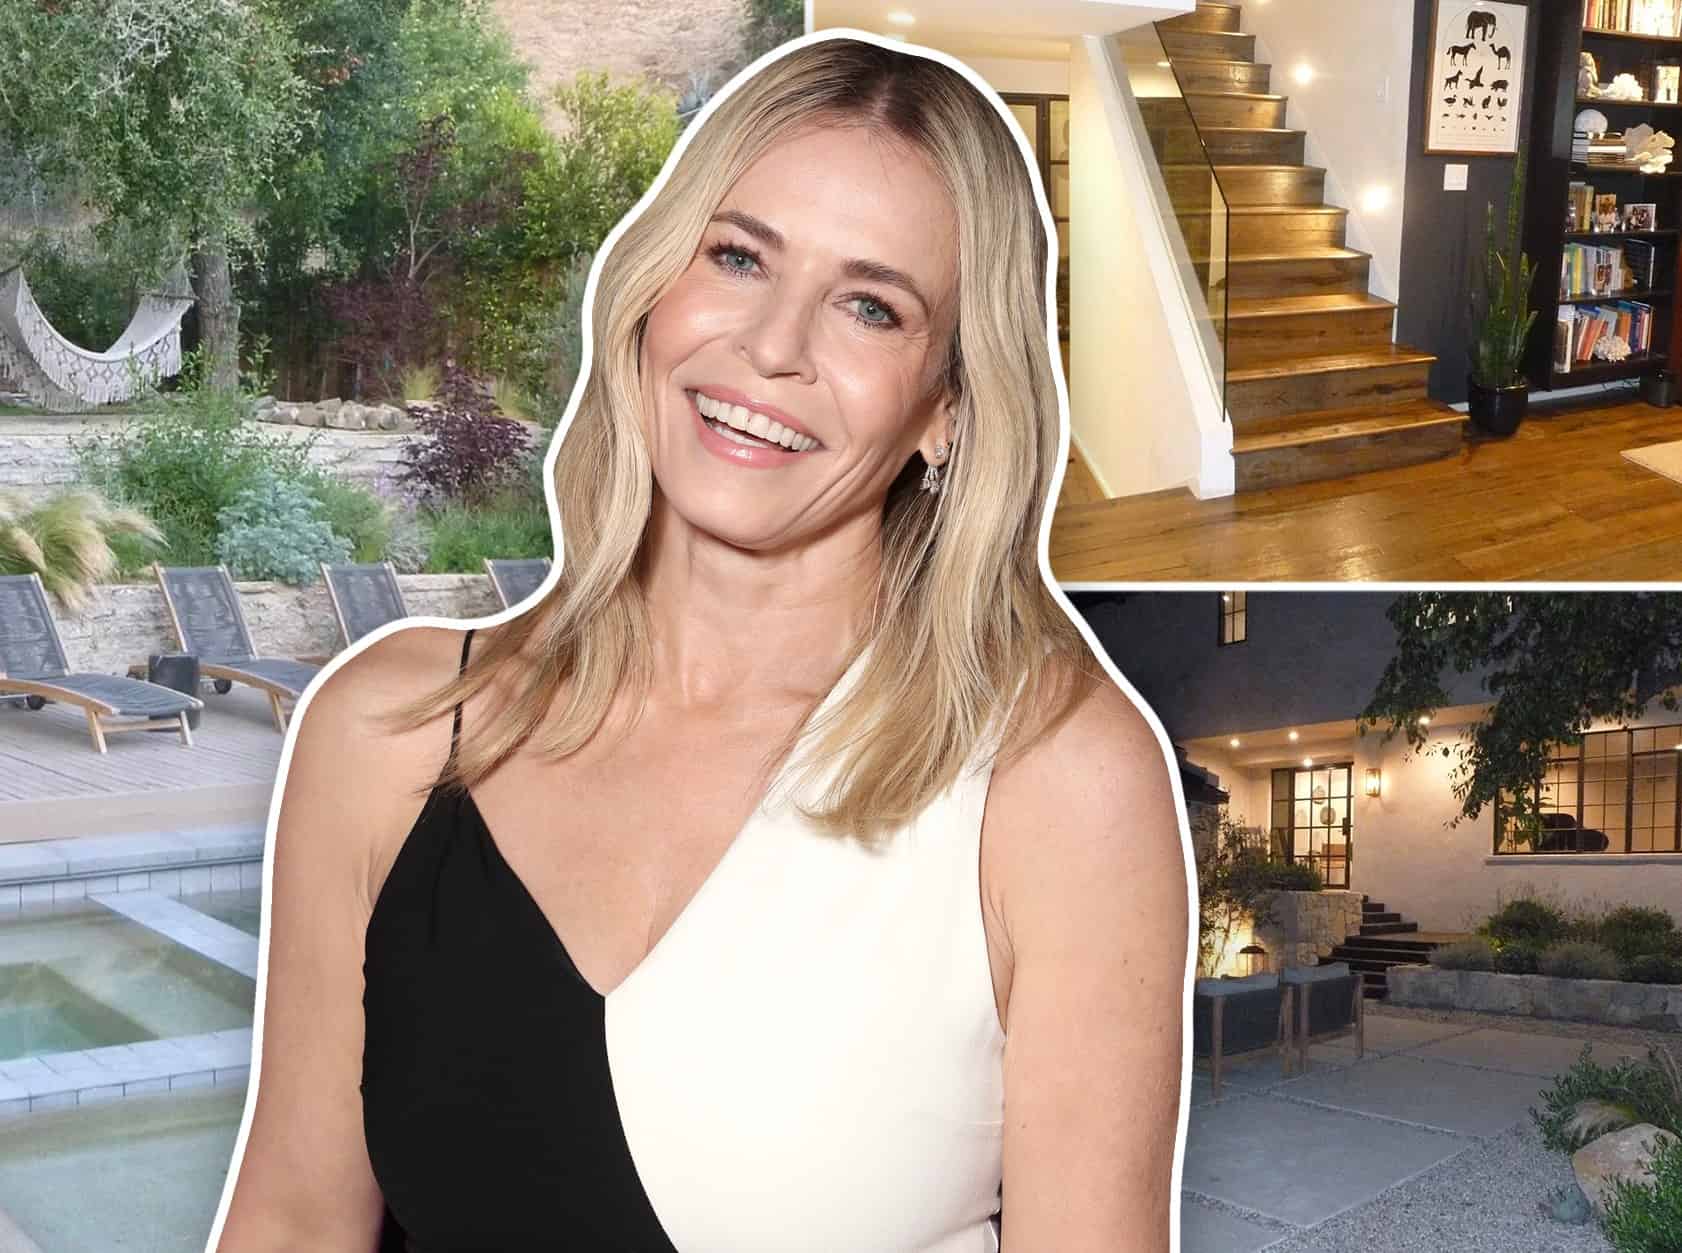 In 2010, Chelsea Handler purchased a house above the Bel-Air Country Club in Los Angeles for $6 million